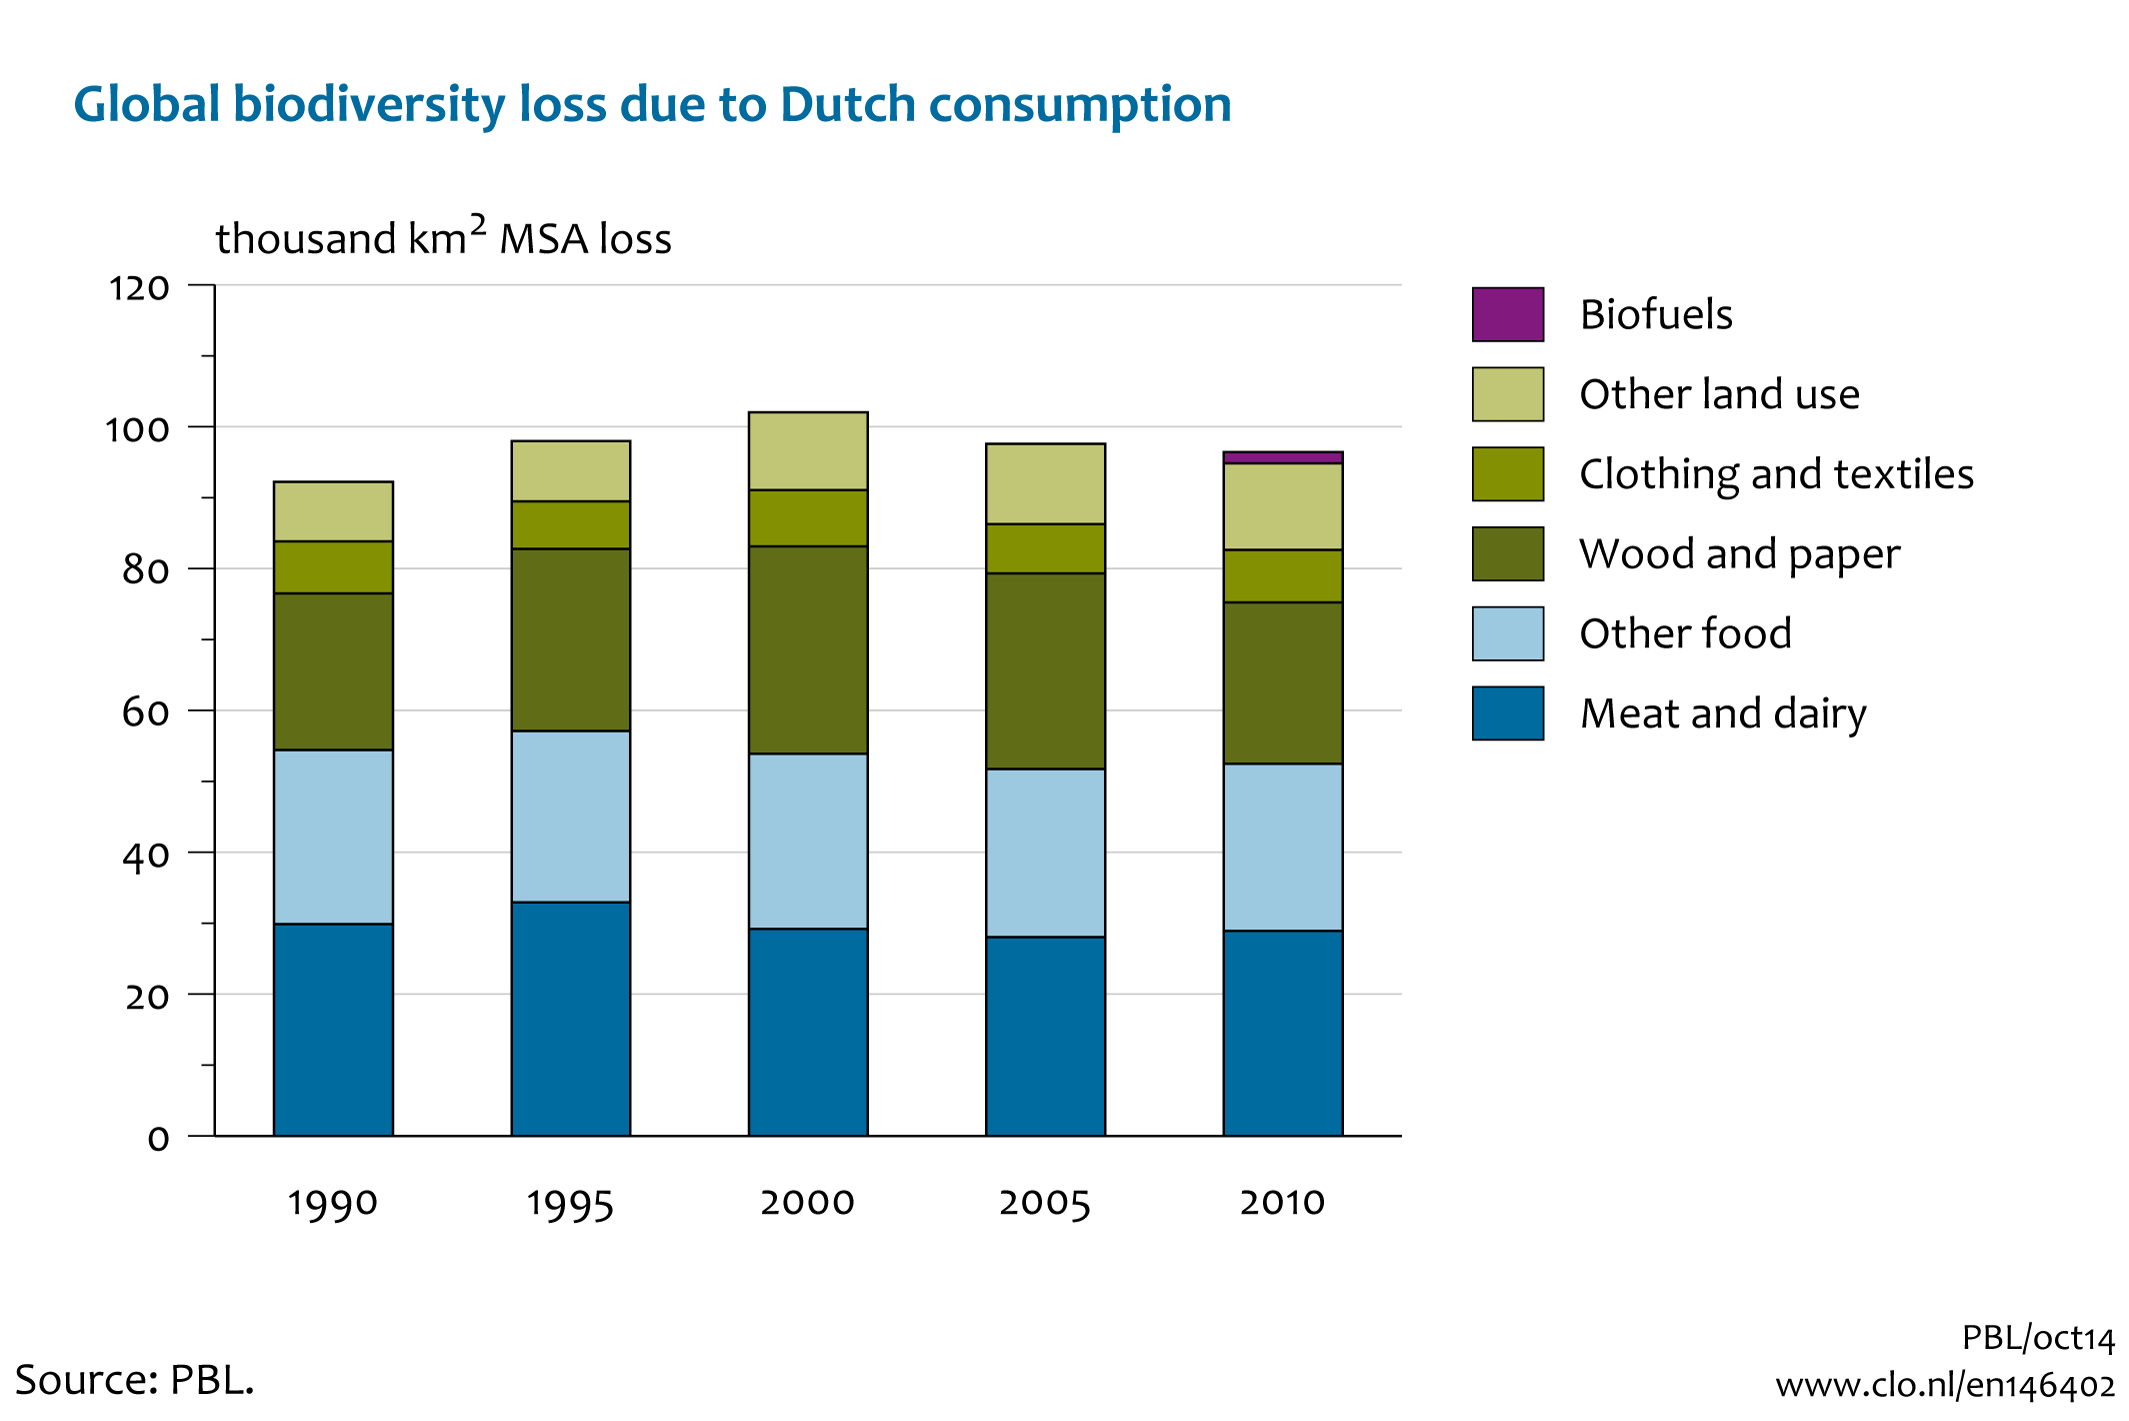 Image  Global biodiversity loss due to Dutch consumption. The image is further explained in the text.